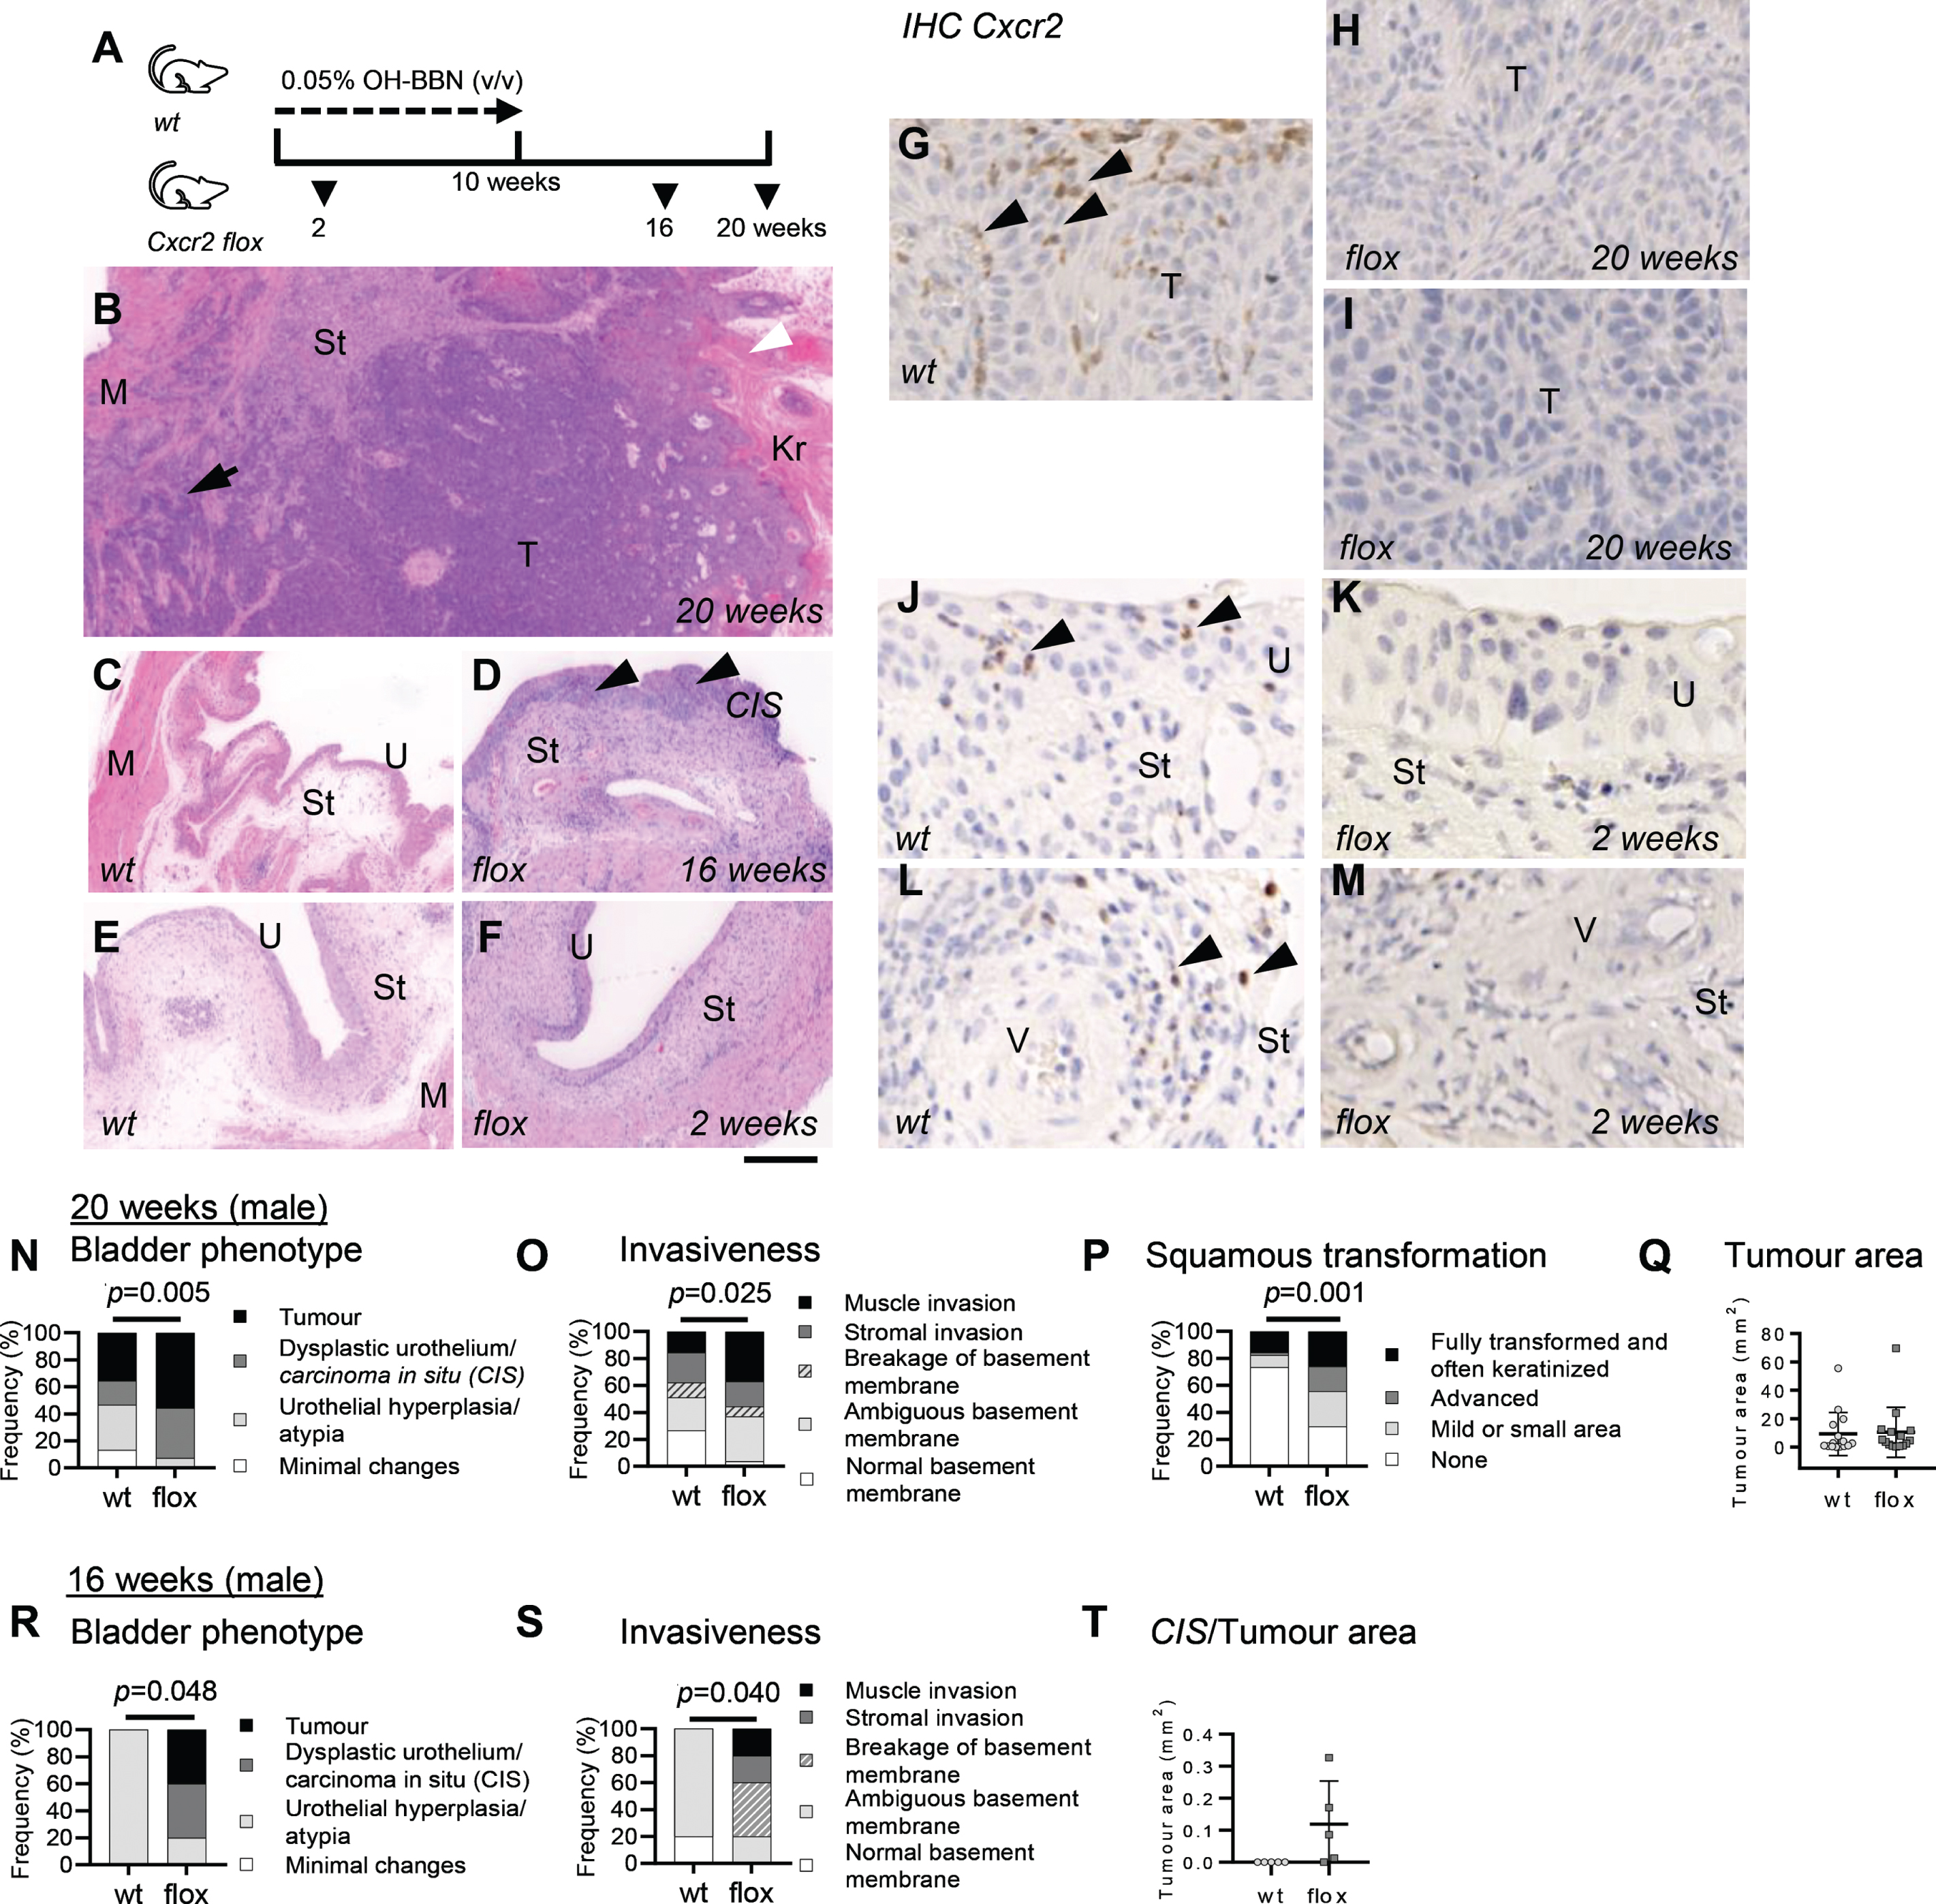 Bladder tumour phenotype of LysMCre Cxcr2flox/flox (Cxcr2 flox) mice. (A) Mice were given tobacco carcinogen 0.05% (v/v) OH-BBN in drinking water for 10 weeks, and bladder tissues were examined at 2, 16 and 20 weeks from the start of the carcinogen treatment. (B) An example of a bladder tumour developed at 20 weeks from the start of the carcinogen treatment in a Cxcr2 flox animal, with an invasion to the muscle (arrow) and keratinization (Kr). Representative images of wildtype (C, E) and Cxcr2 flox (D, F) bladders at 16 weeks (C, D), and 2 weeks (E, F). Enhanced tumour pathogenesis of the urothelium, such as carcinoma in situ-like lesions (arrowheads) was observed in Cxcr2 flox bladders at 16 weeks (D). At 2 weeks, the differences between wildtype and Cxcr2 flox bladders were not evident. IHC staining showed infiltrating Cxcr2+ myeloid cells in tumours at 20 weeks (G), the urothelium (J) and around the blood vessels in the bladder stroma (L) at 2 weeks in wildtype mice (arrows in G, J, L). In contrast, the staining was absent in Cxcr2 flox tumours (H, I) and in the bladder at 2 weeks’ time point (K, M). IHC staining was performed in at least n = 3 samples in each genotype. Annotations in B-M are; CIS, carcinoma in situ; Kr, keratinization; M, muscle, St, stroma; T, tumour; U, urothelium; V, blood vessel. The scale bar represents 500μm in B, 250μm in C-F, 30μm in G-M. For evaluation of the bladder and tumour phenotype, the scoring criteria from our previous study [35] were refined to optimally capture the phenotype of OH-BBN treated mice under our protocol. The “bladder phenotype” defines the overall state of the urothelial tumorigenesis and progression. The “invasiveness” describes the state of the basement membrane and invasion of tumour cells, while the “squamous transformation” describes the squamous appearance of cells and keratinization in the urothelium or in the tumour. The criterium “minimal changes” of the bladder phenotype was established to indicate the baseline appearance of the urothelium treated with OH-BBN observed [35]. One representative H&E section was scored per animal. The bladders usually showed a mixed phenotype of all criteria. The worst score was used. Bladder phenotype (N, R), invasiveness (O, S) and squamous transformation (P) are expressed as a frequency of observations (%) comparing wildtype (wt, n = 45) and Cxcr2 flox (flox, n = 27) male mice at 20 weeks (N-P) and at 16 weeks (n = 5 per cohort) (R, S). Incidents of tumour in N were presented by numbers in Table 1. The tumour area was measured by QuPath in a representative section per mouse at 20 weeks (n = 15 per cohort) (Q) and carcinoma in situ (CIS) and tumour areas at 16 weeks (n = 5 per cohort) (T). The means with standard deviation are shown in bars (Q, T). Observations in male mice are presented (N-T). The p-values (Mann-Whitney test) are indicated where significant (p < 0.05).